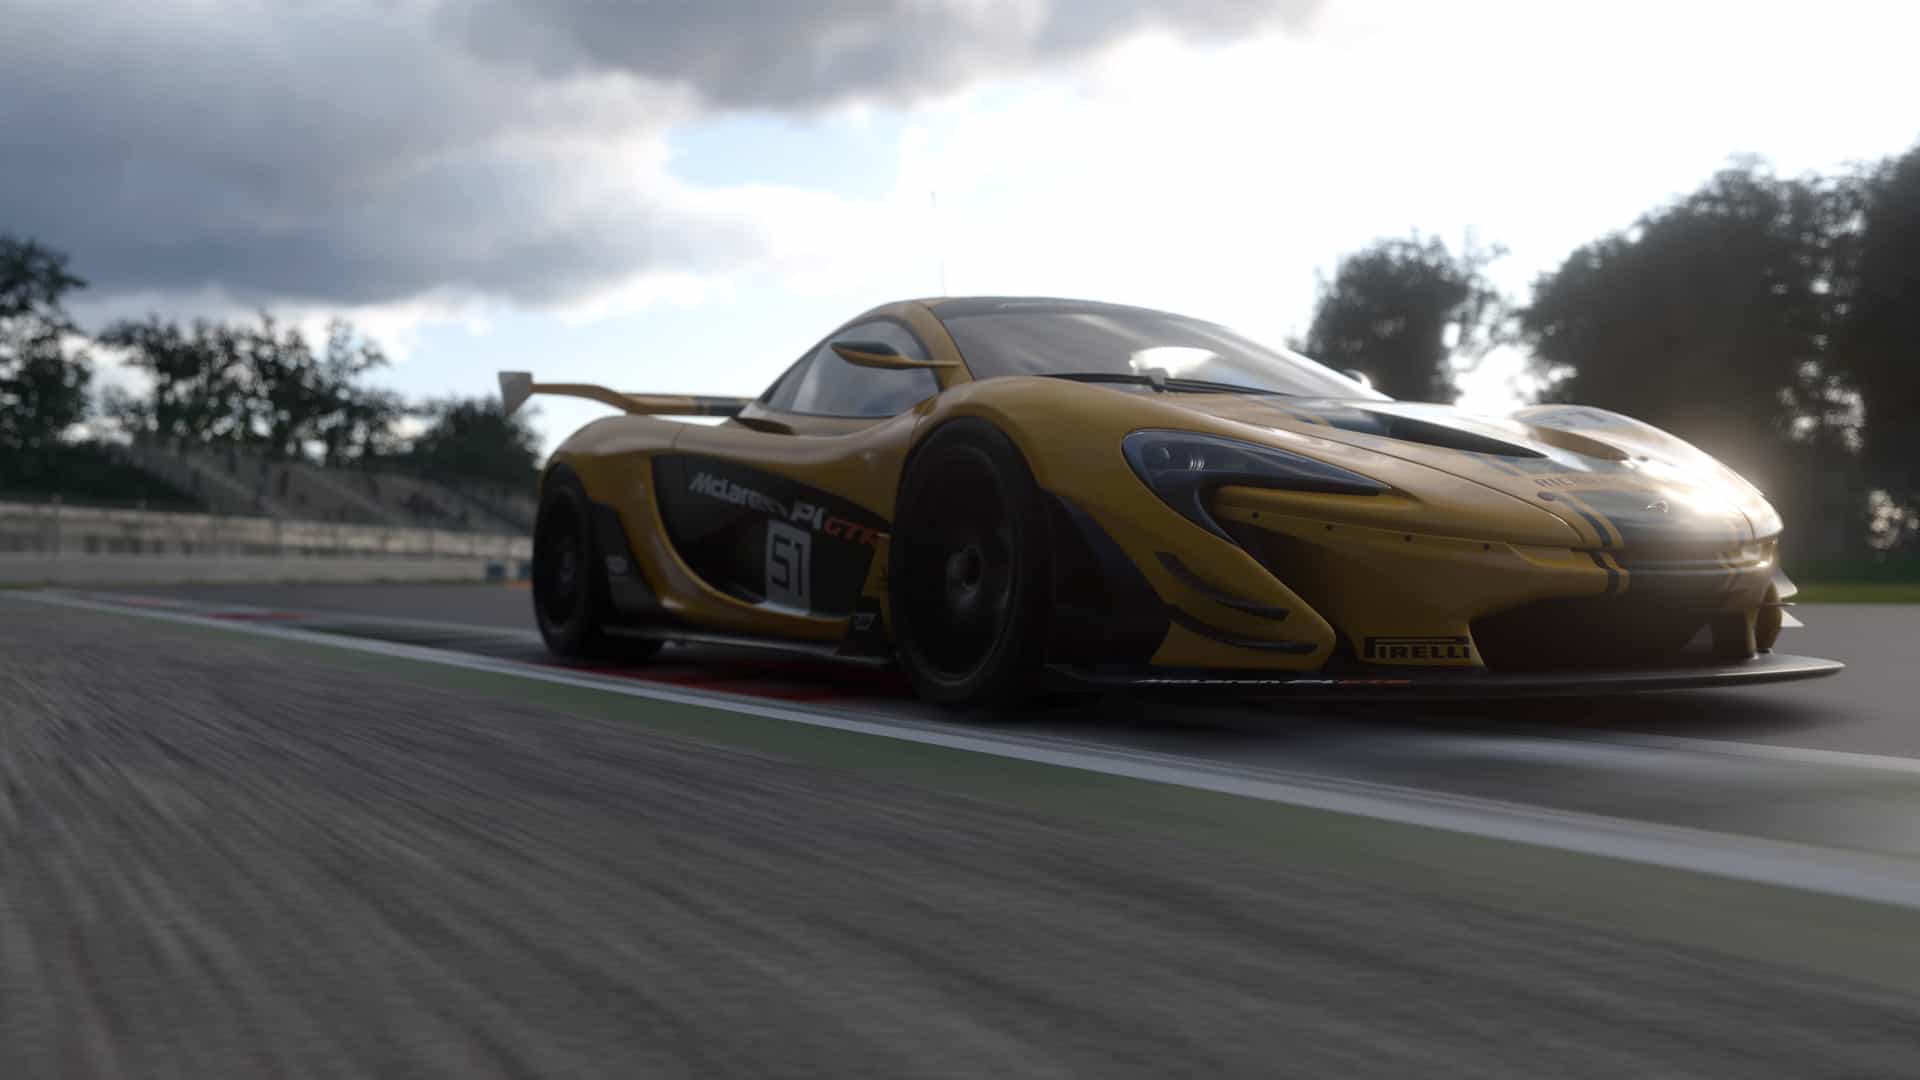 Your guide to Gran Turismo 7's Daily Races, wc 16th January 2023 - Hypercar track day